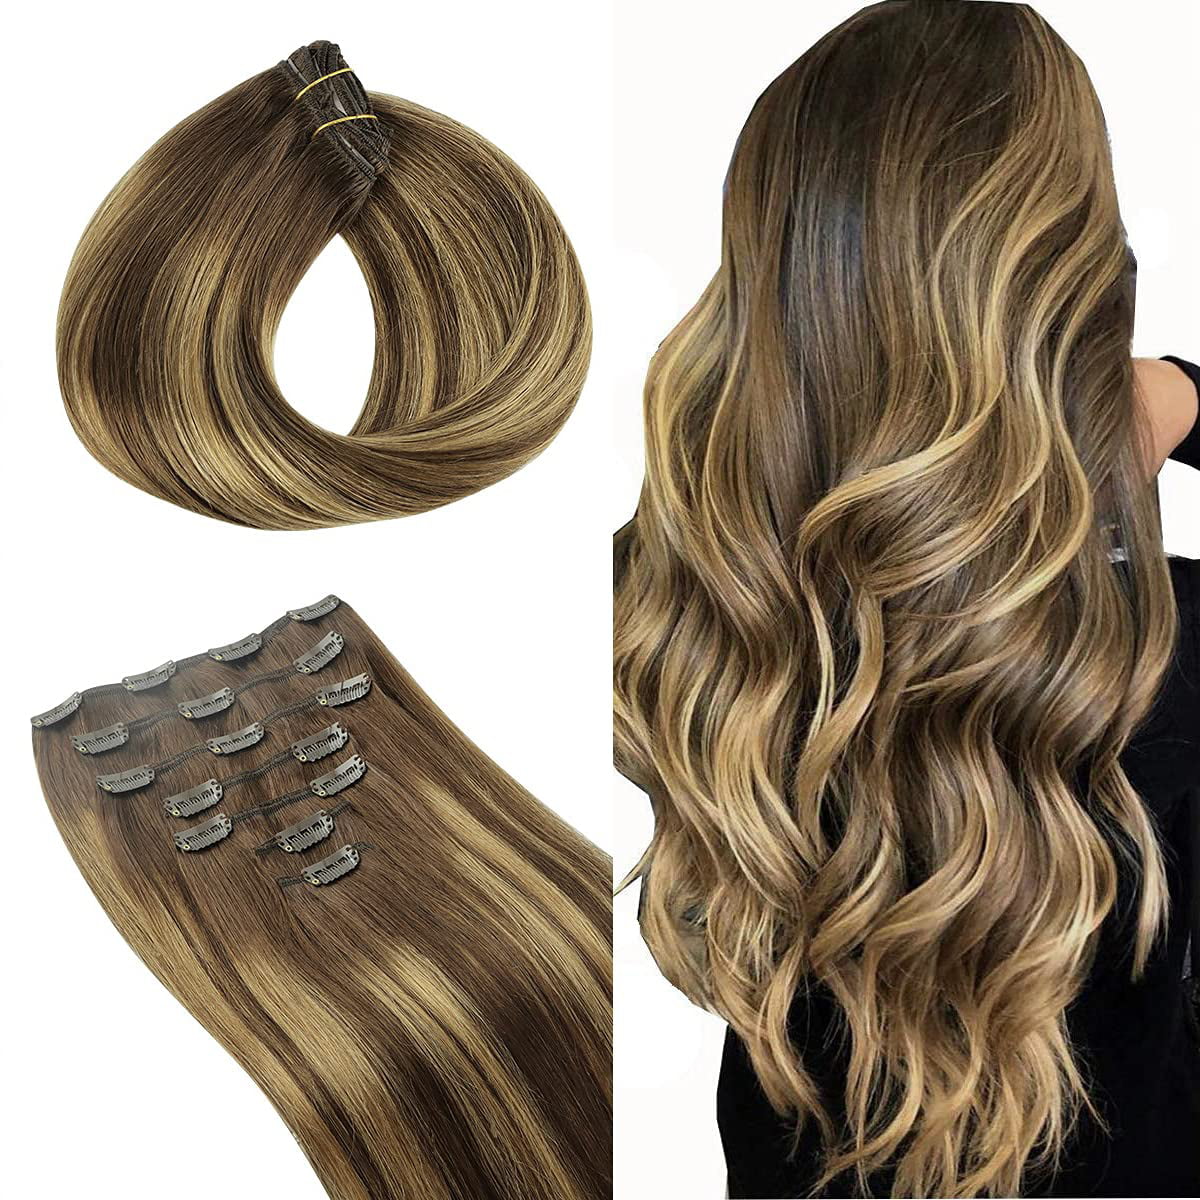 Clip in Hair Extensions, hotbanana Balayage Chocolate Brown to Caramel  Blonde Clip in Hair Extensions Real Human Hair Straight Remy Hair 22 inch  120g 7pcs 